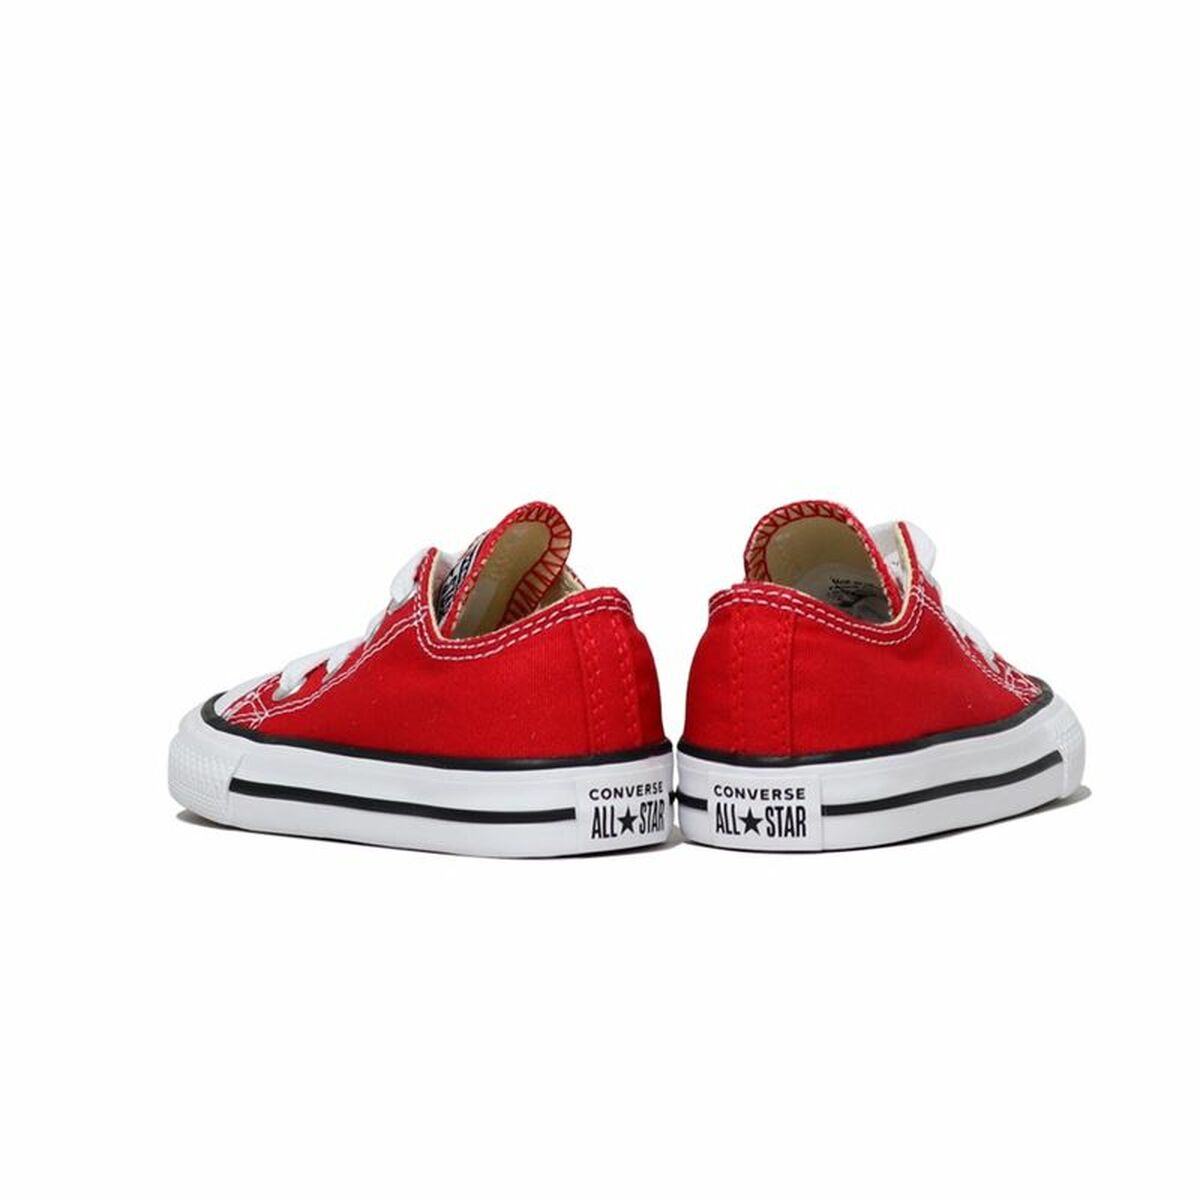 Baby's Sportschoenen Converse All Star Classic Low Rood